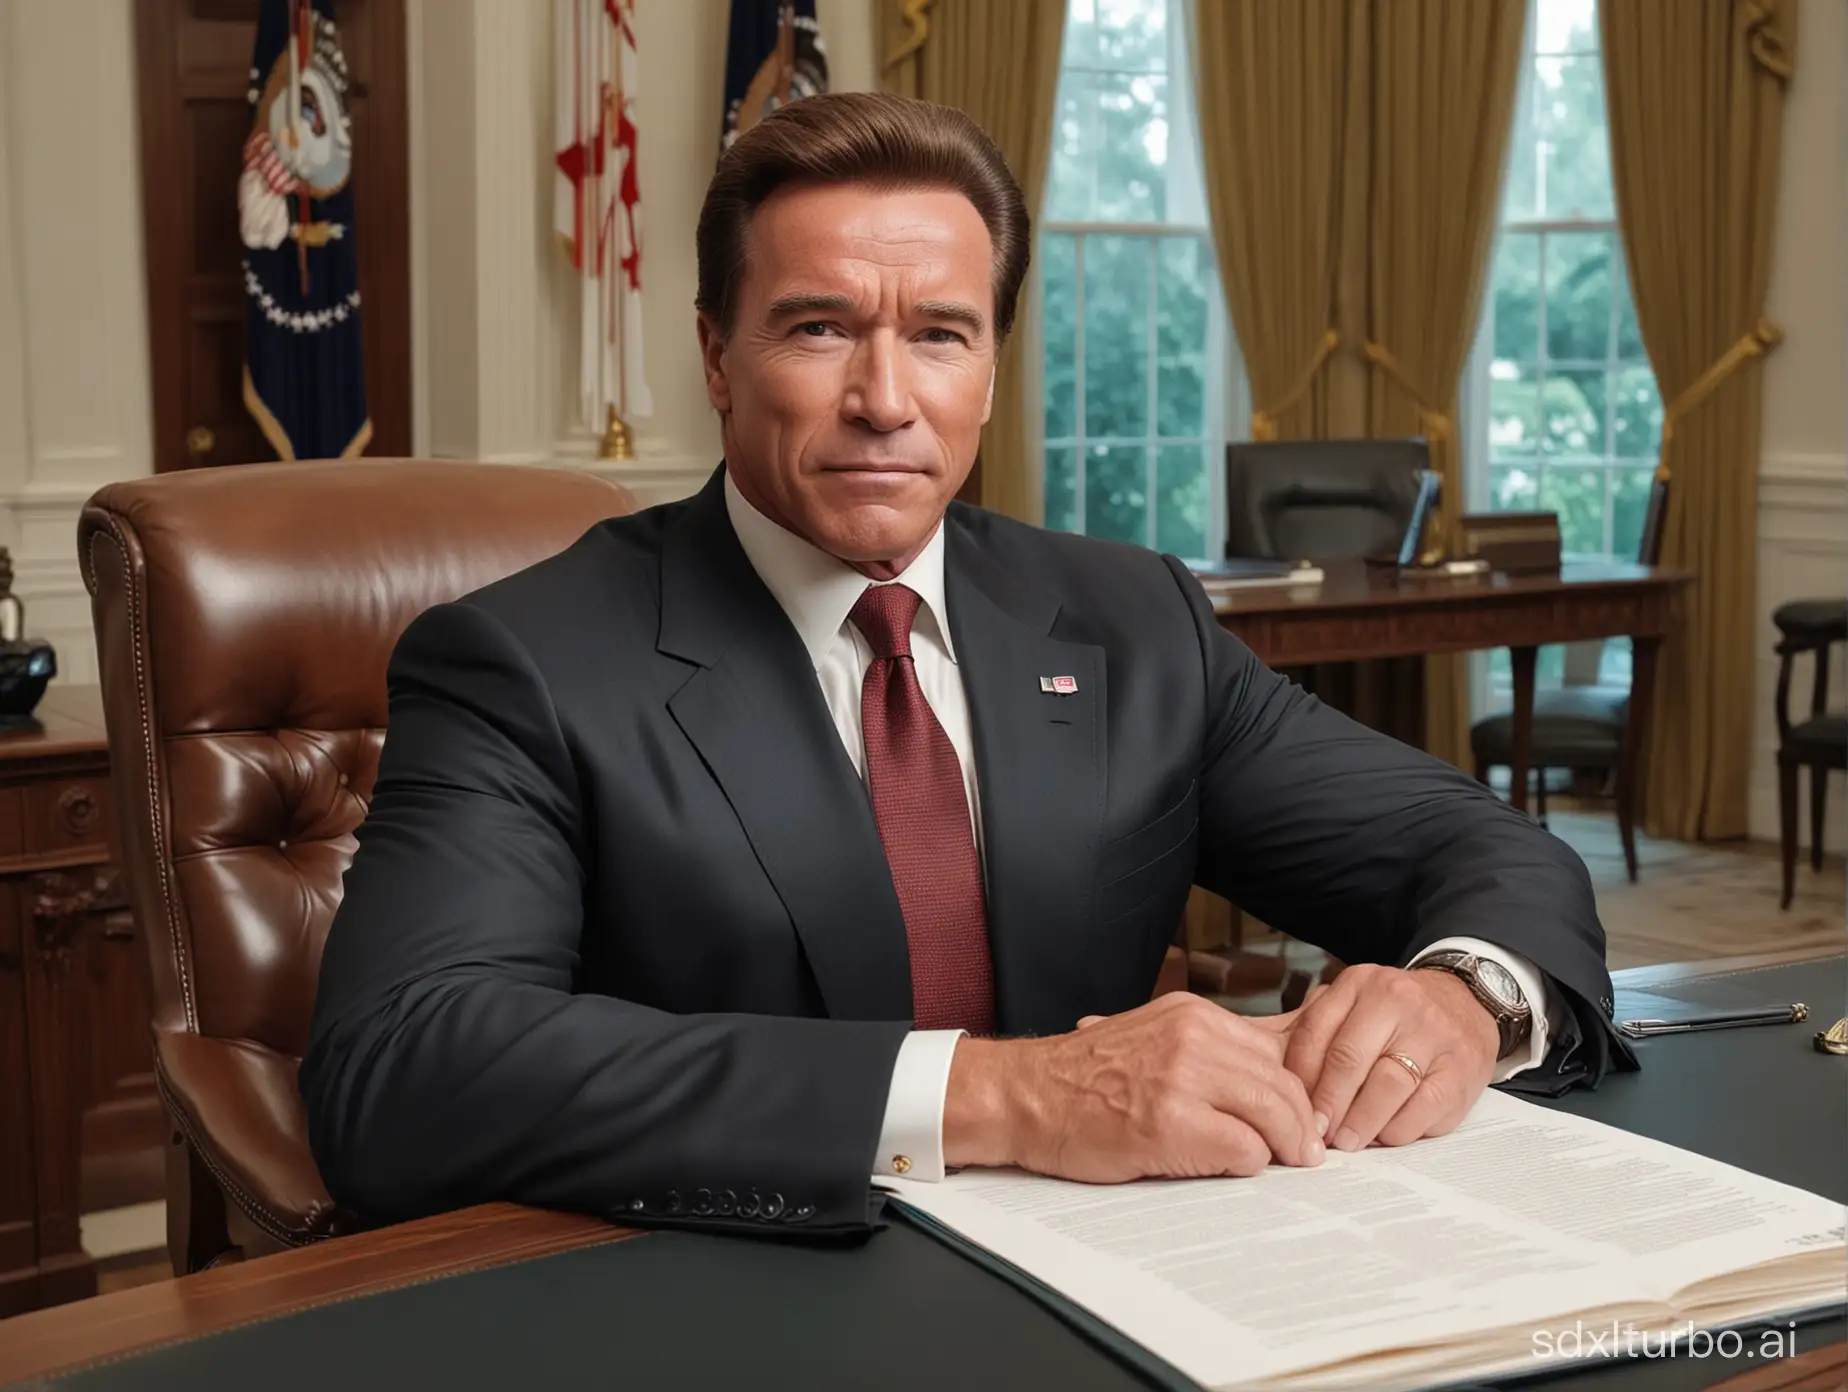 Arnold Schwarzenegger as president sitting in the oval officecof the White House extremely photo realistic imaging.